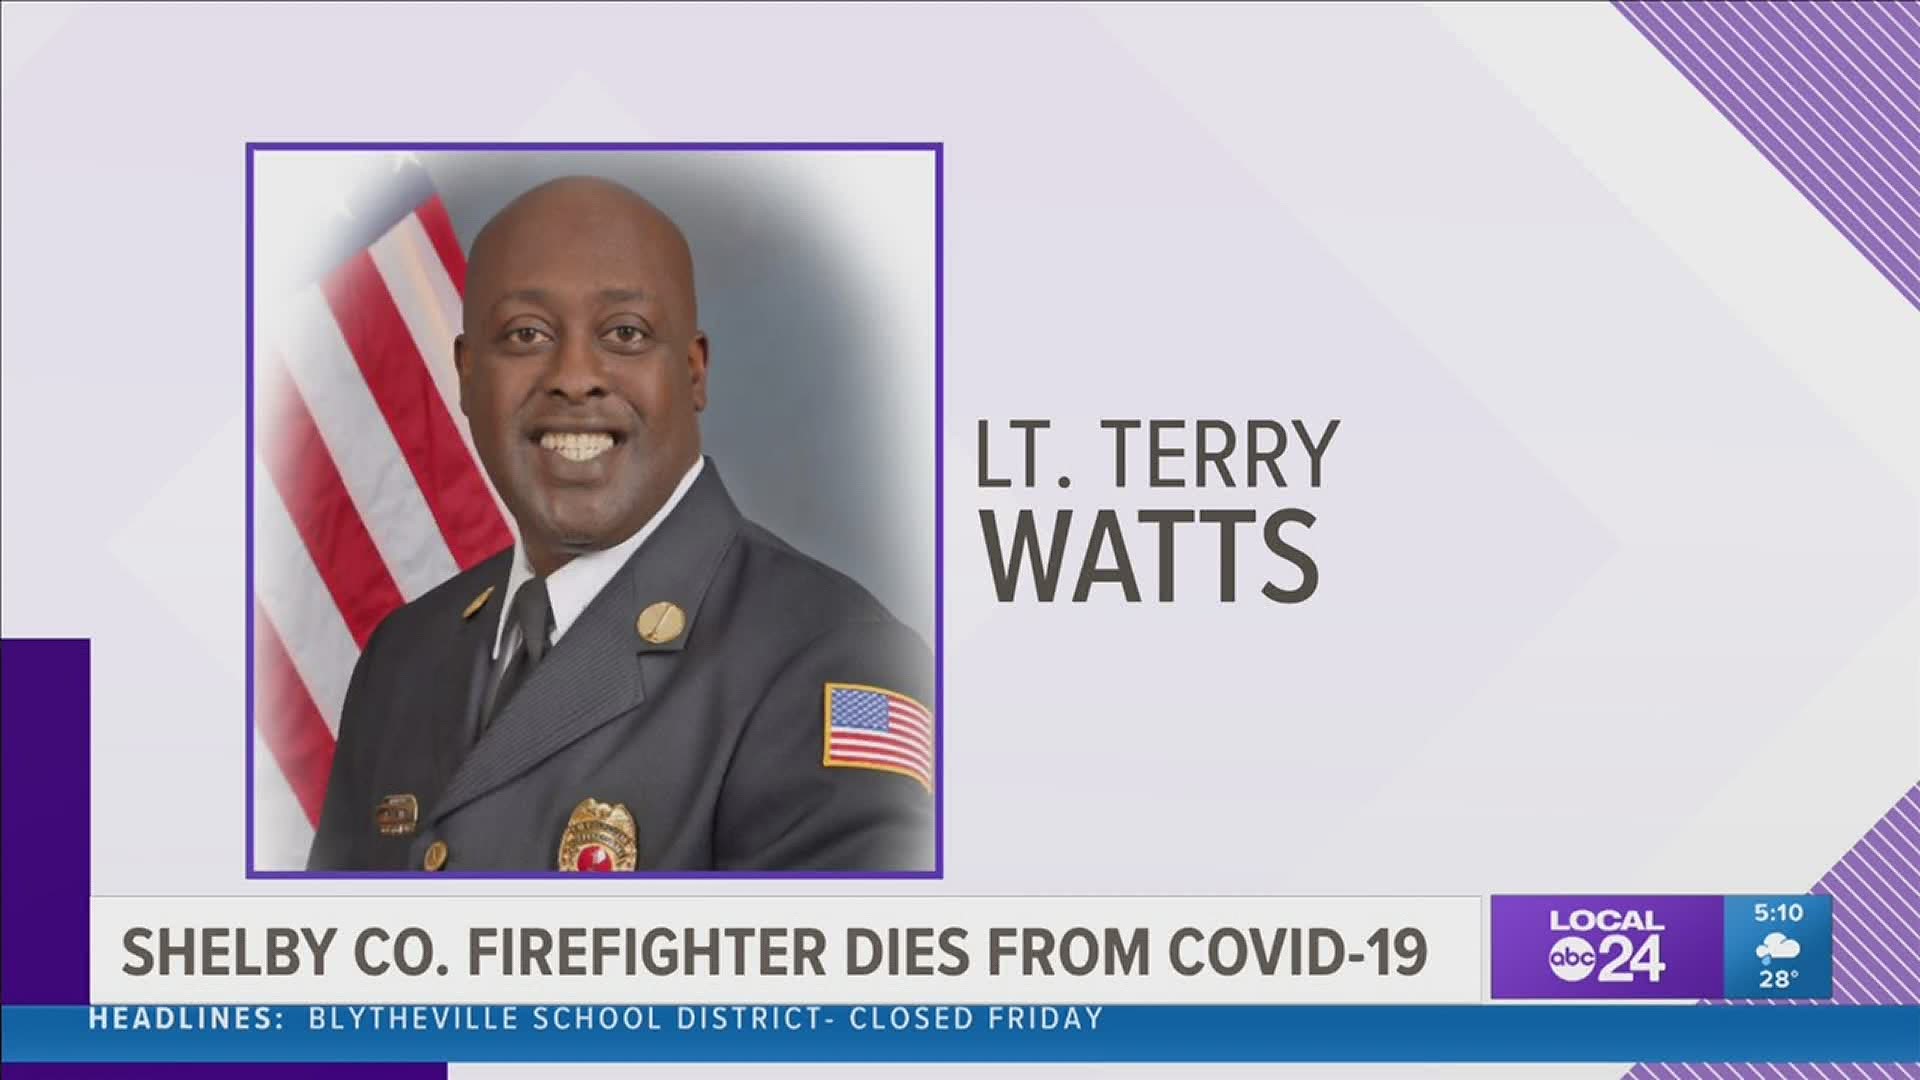 Lt. Terry Watts had been with the department since 2006.